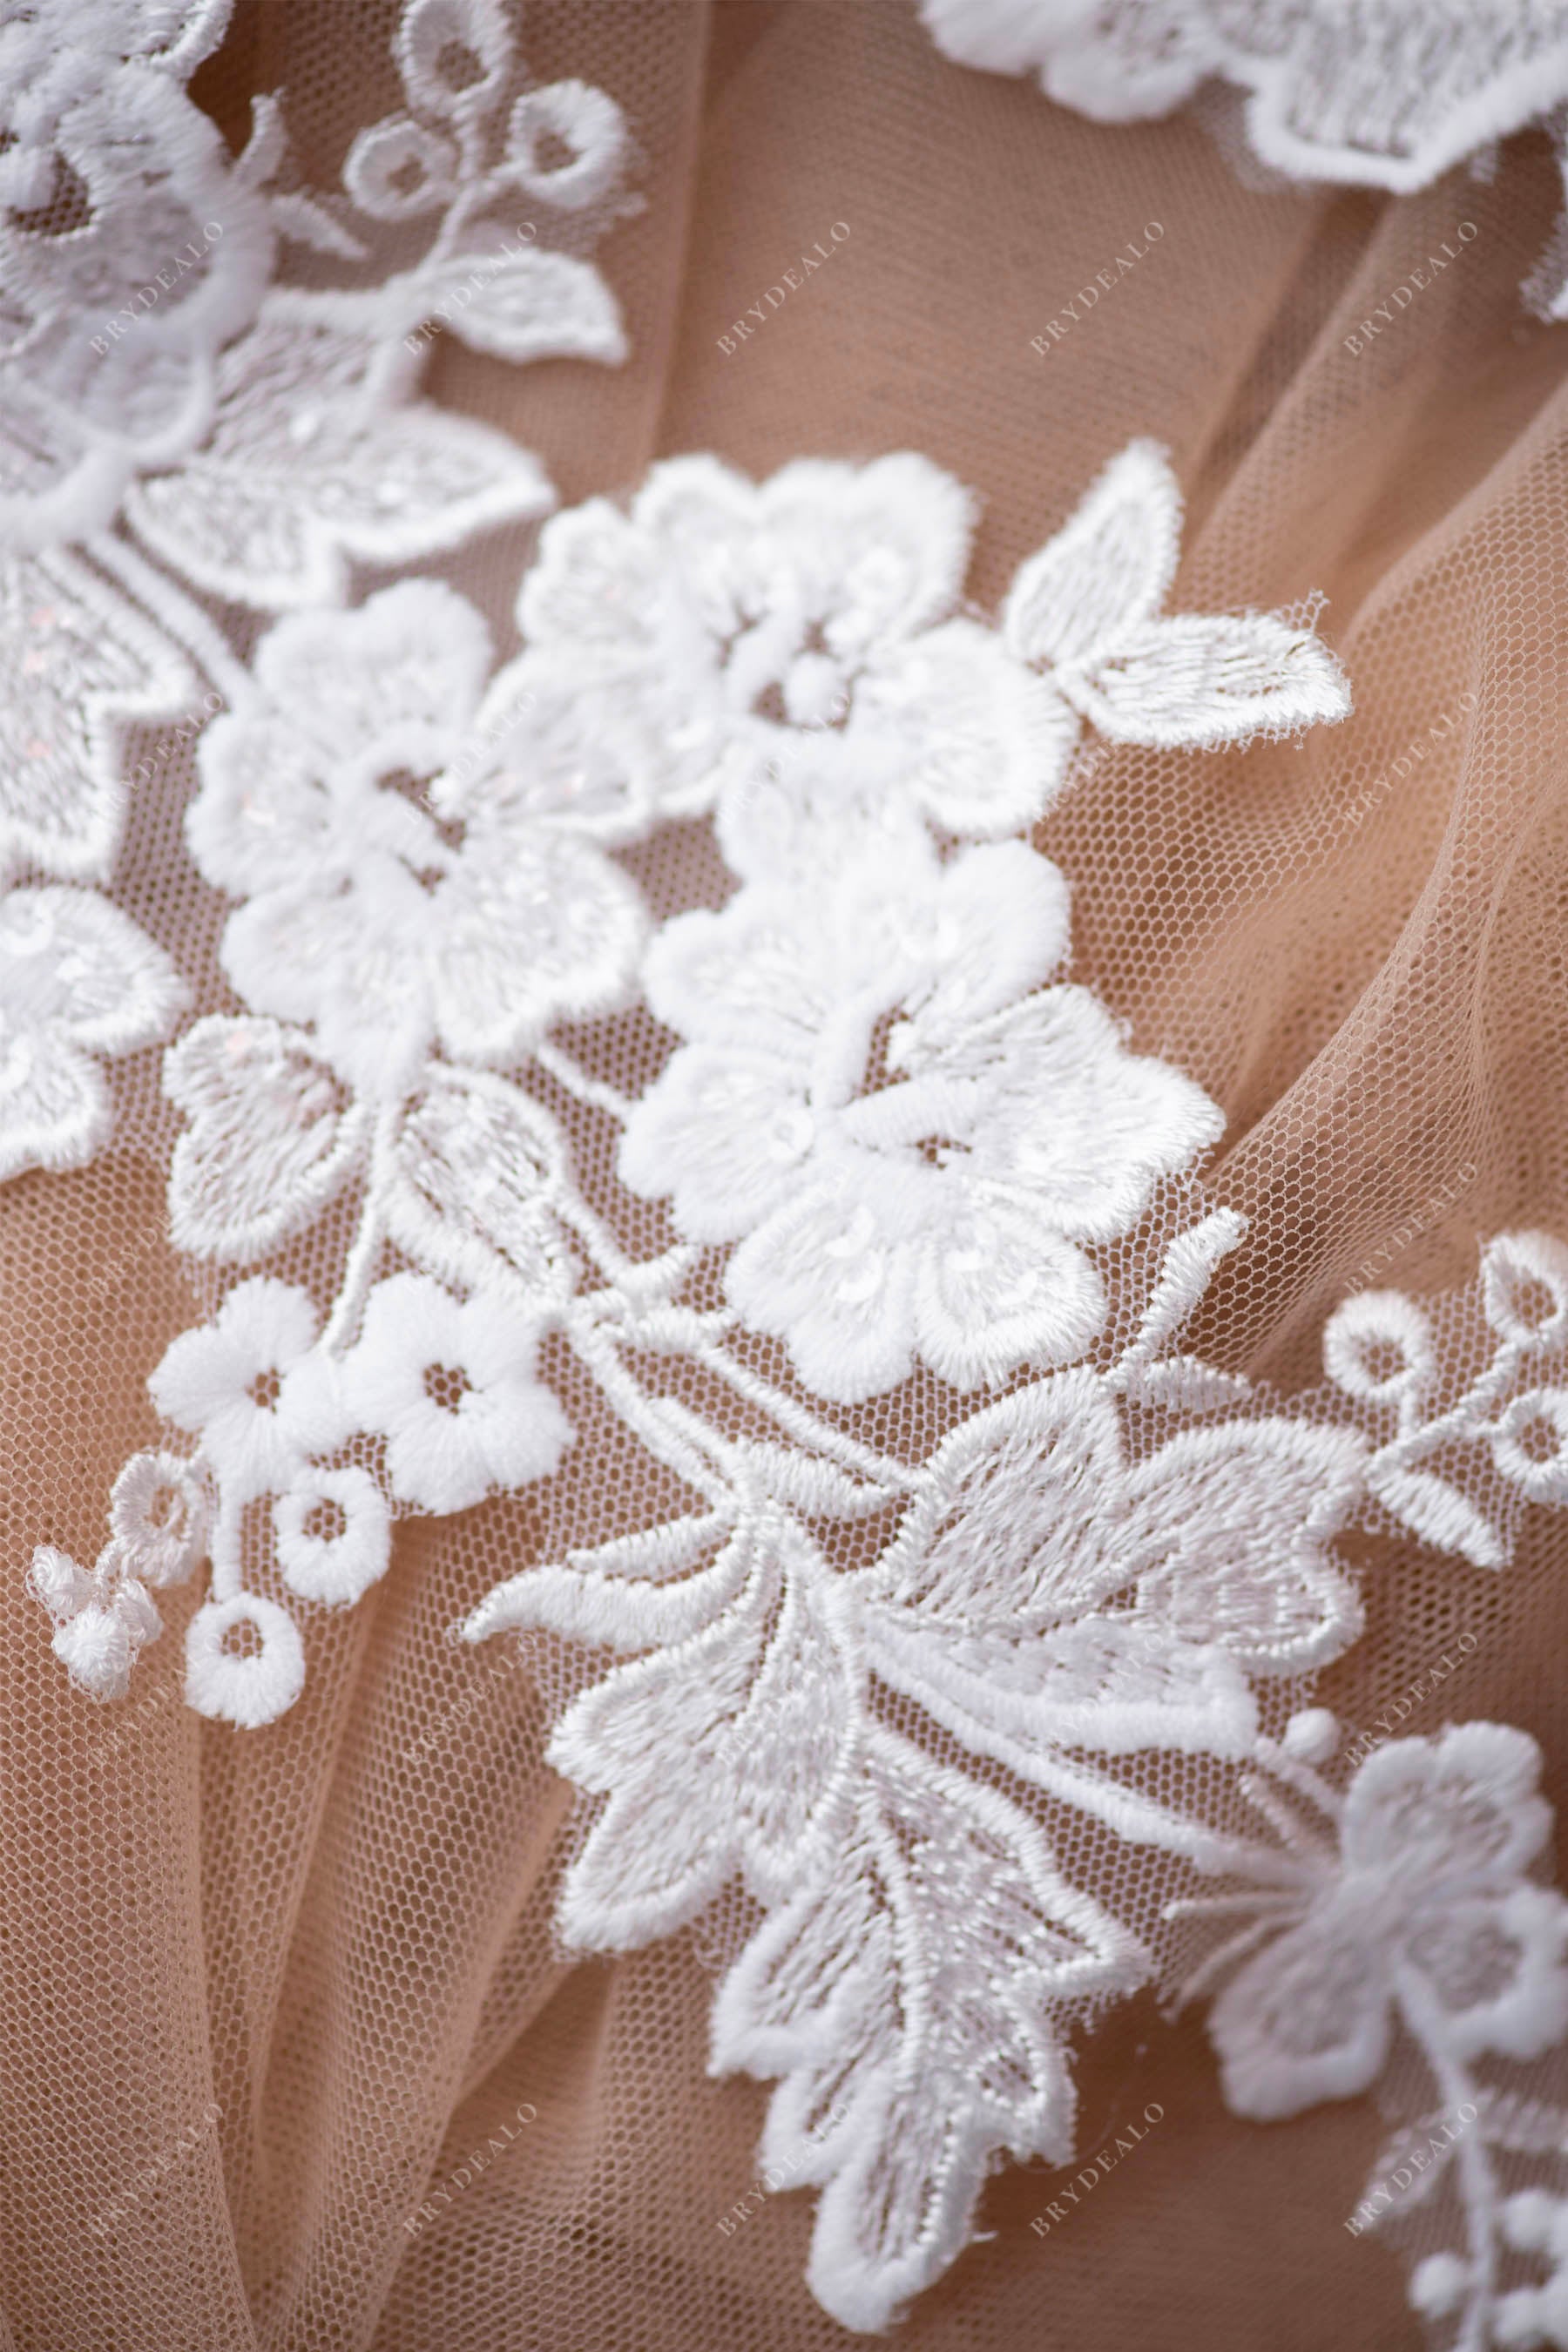 shimmery sequined bridal lace appliques